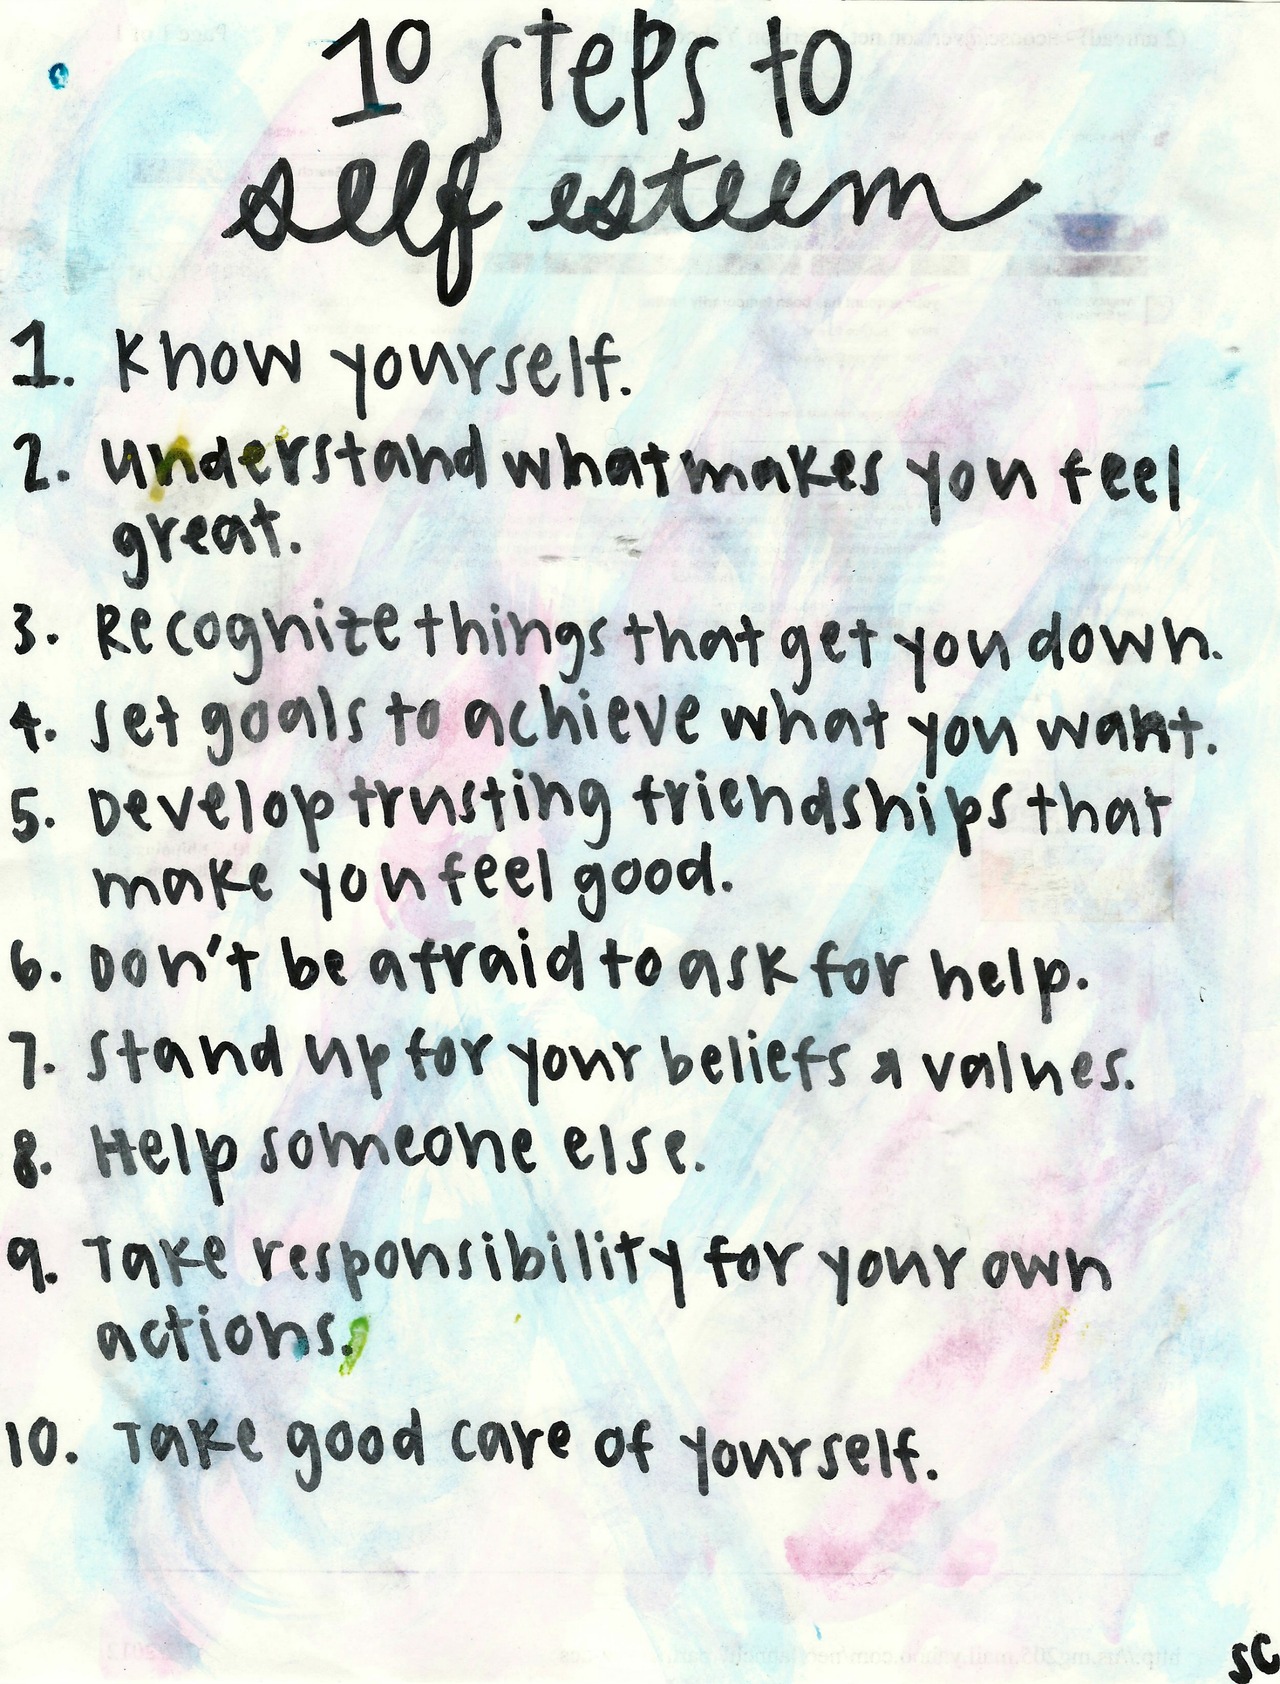 quotes about self confidence tumblr